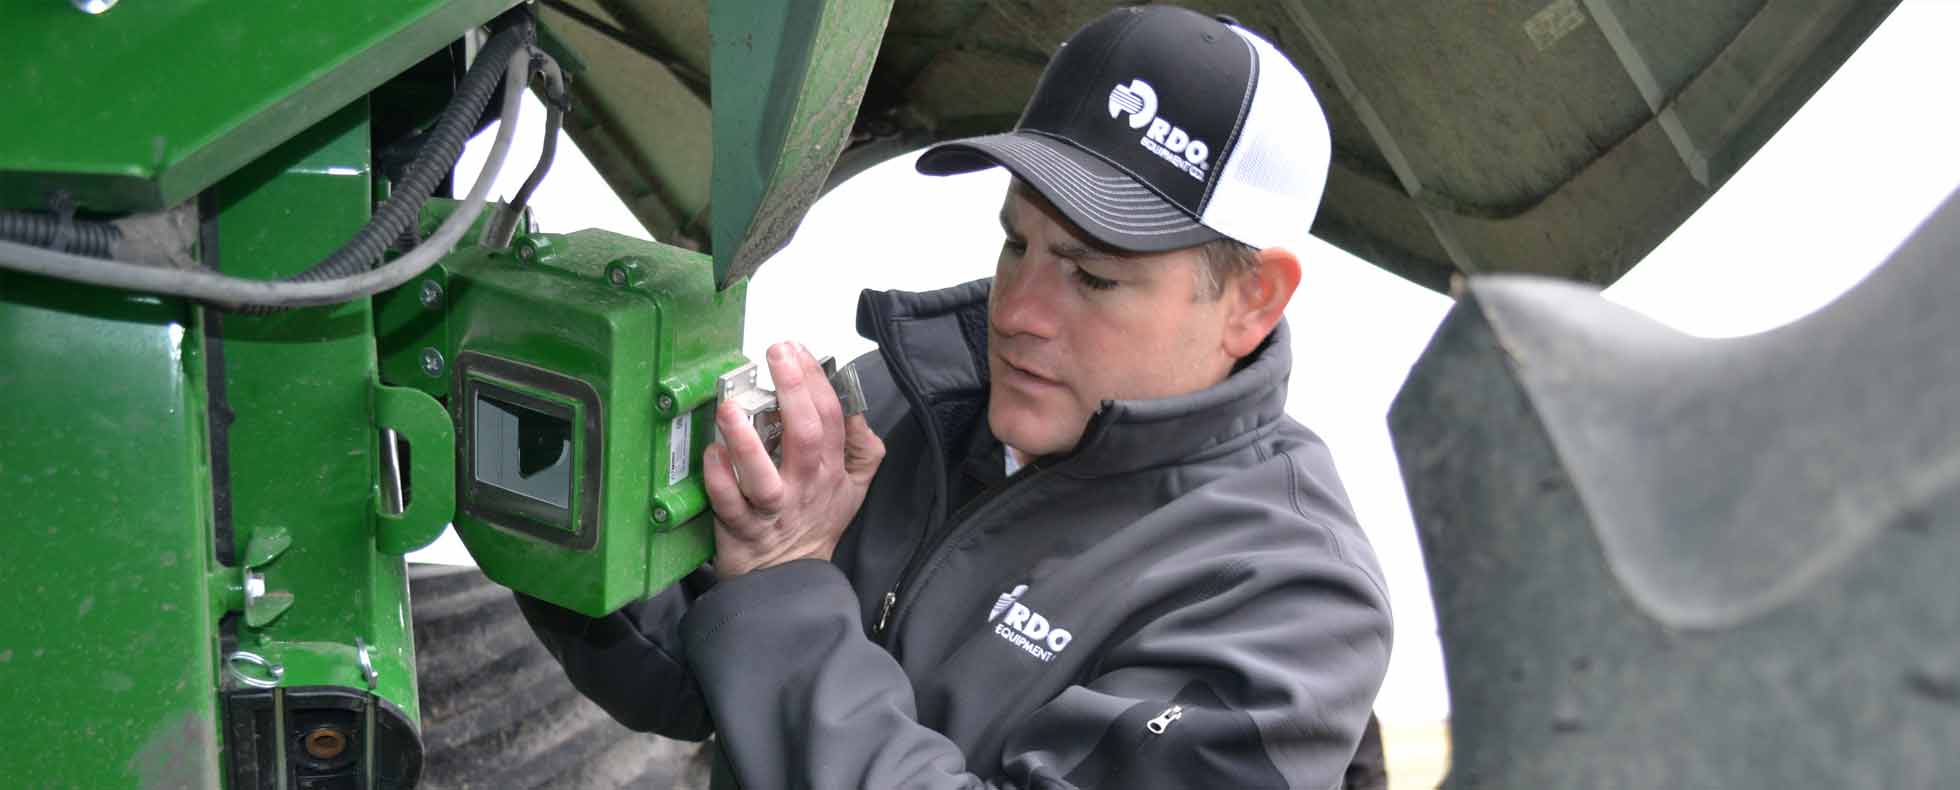 The Top 5 Precision Agriculture Questions with Precision Ag Answers Videos